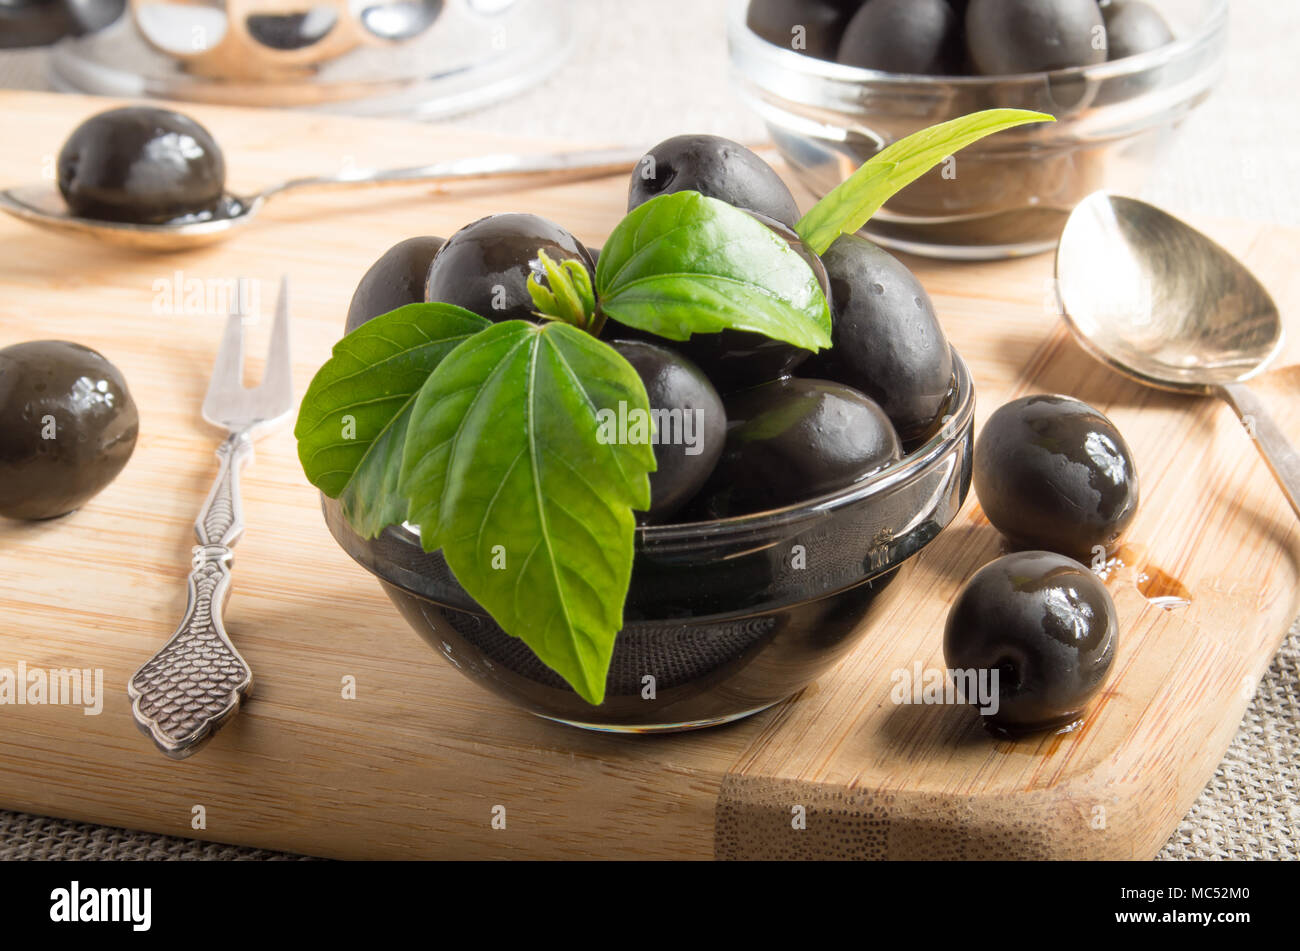 Black olives in glass cups decorated with green leaves on a wooden tray and vintage crockery with shallow depth of focus Stock Photo